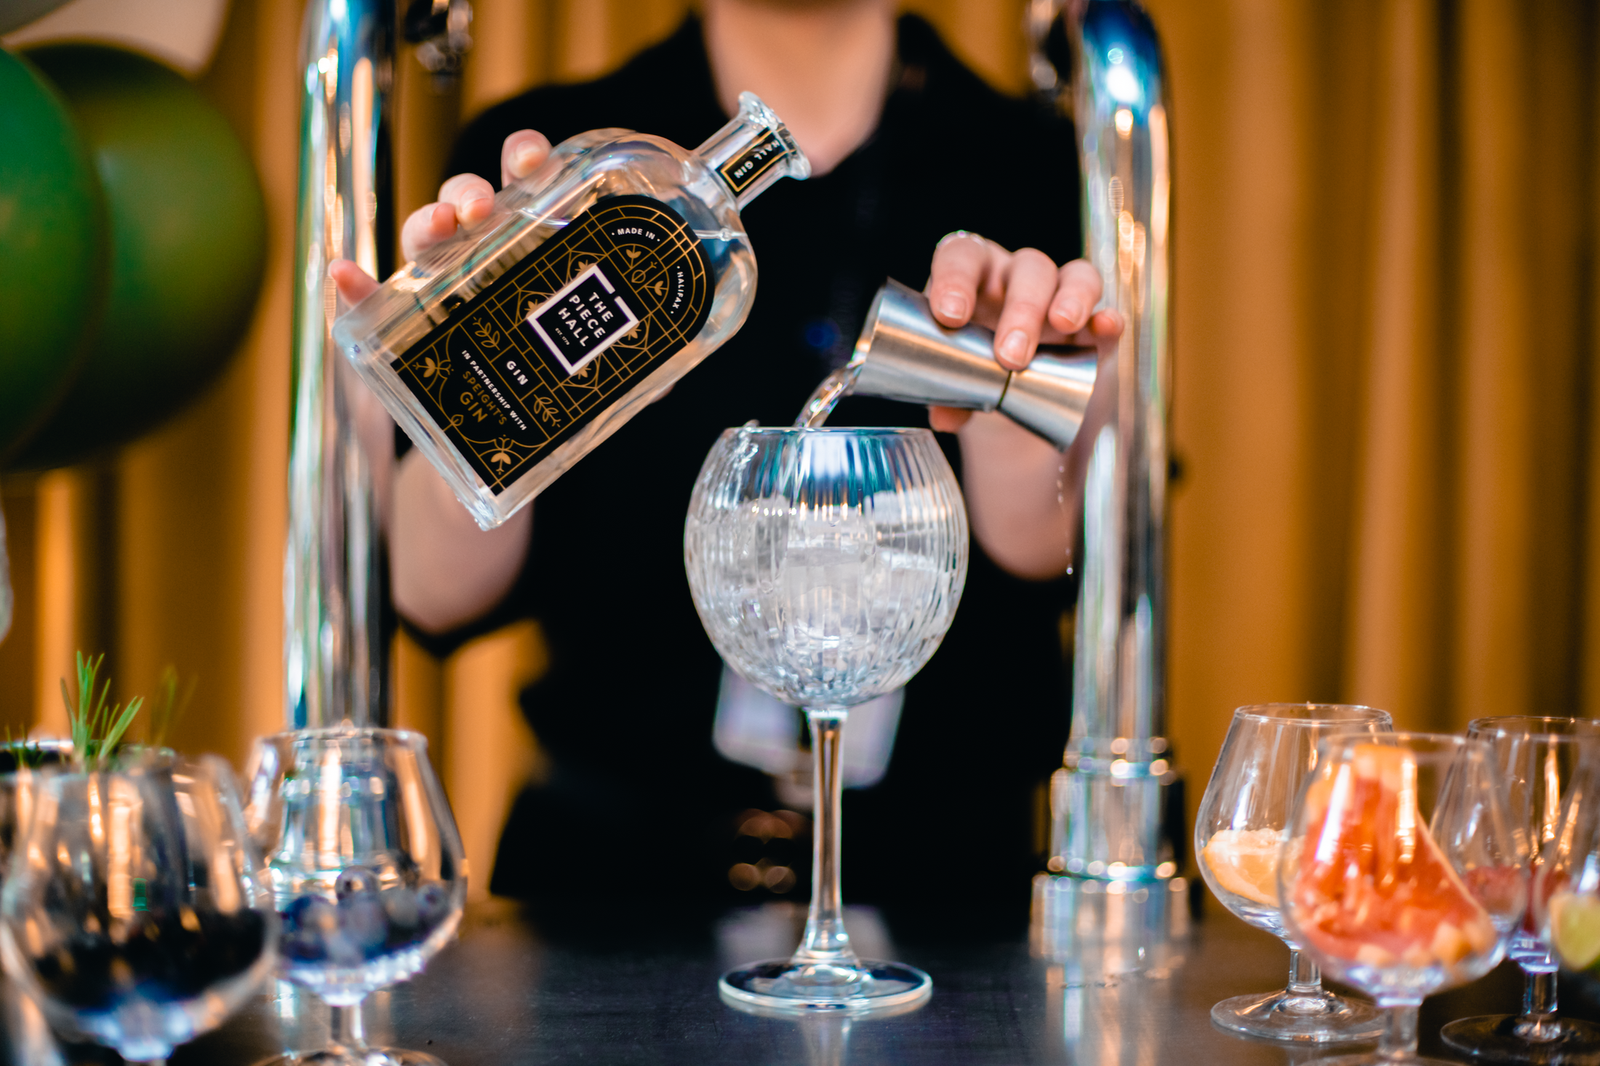 Visitors can take home a Piece of the Hall this Christmas as historic Yorkshire venue launches gin